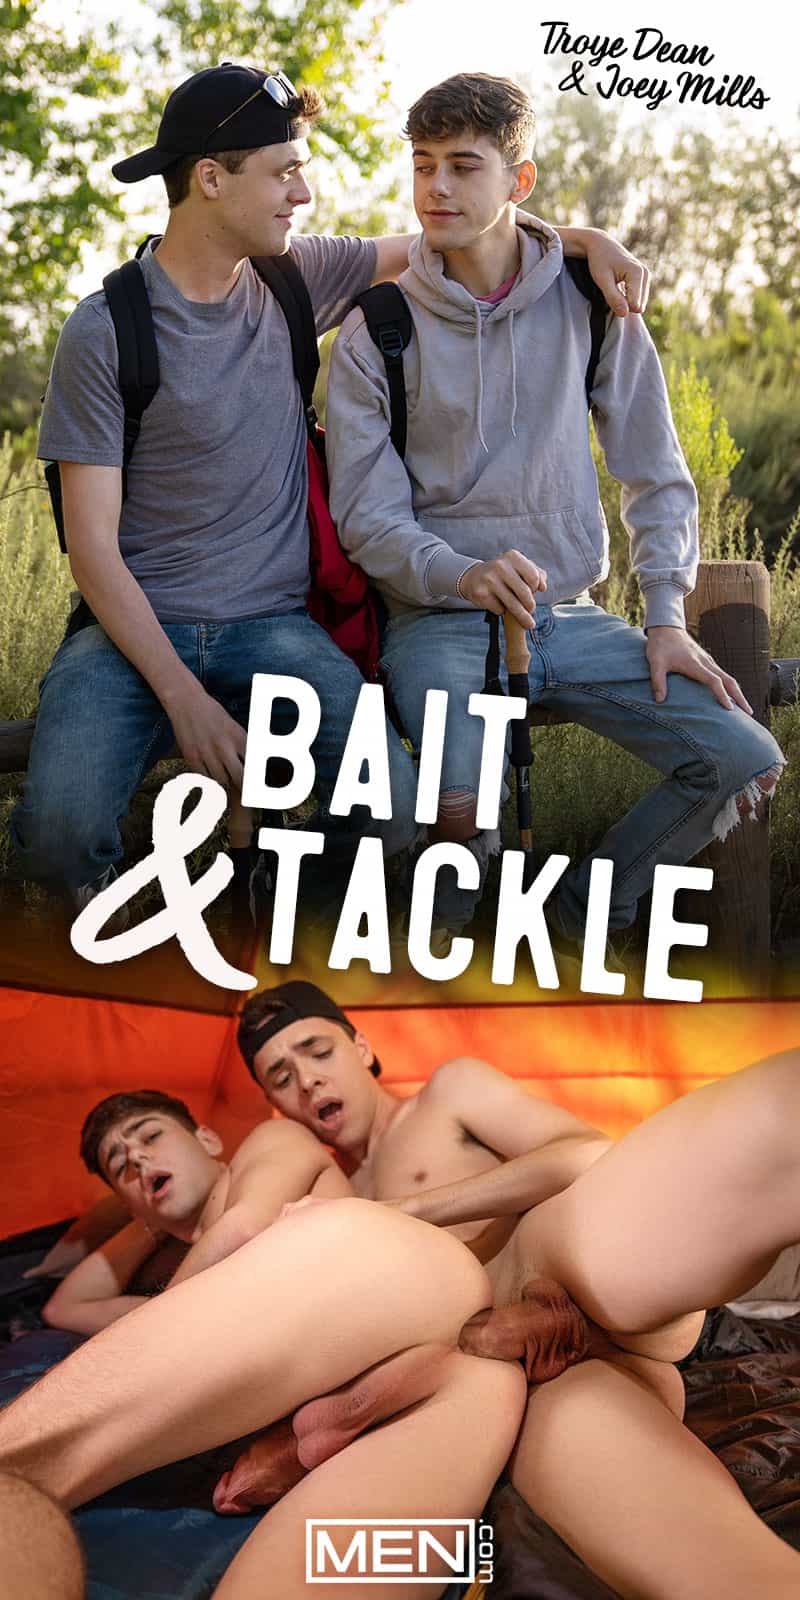 Bait and tackle.joey mills